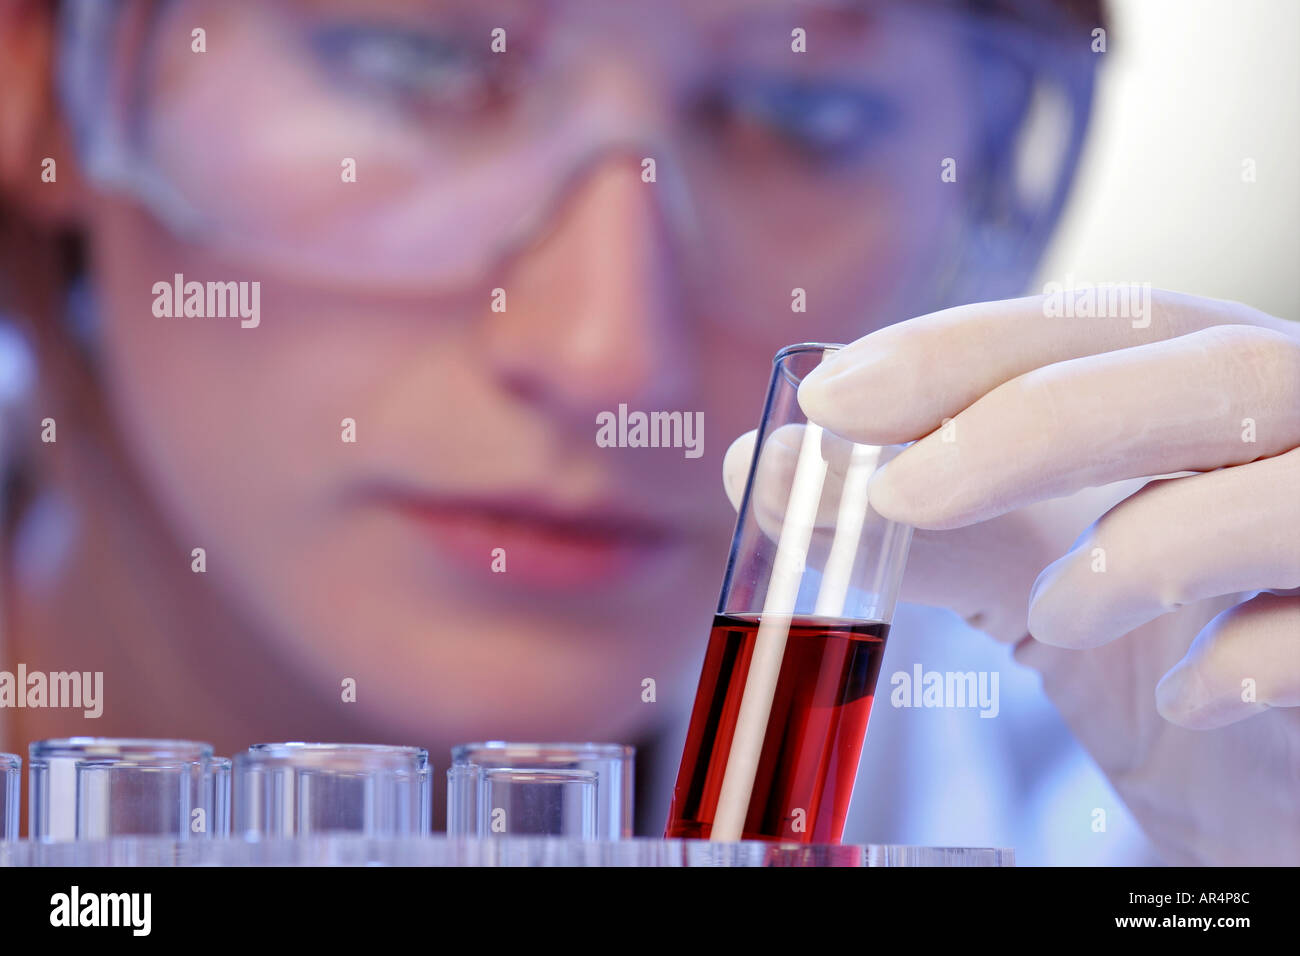 Scientist holding a test tube Stock Photo